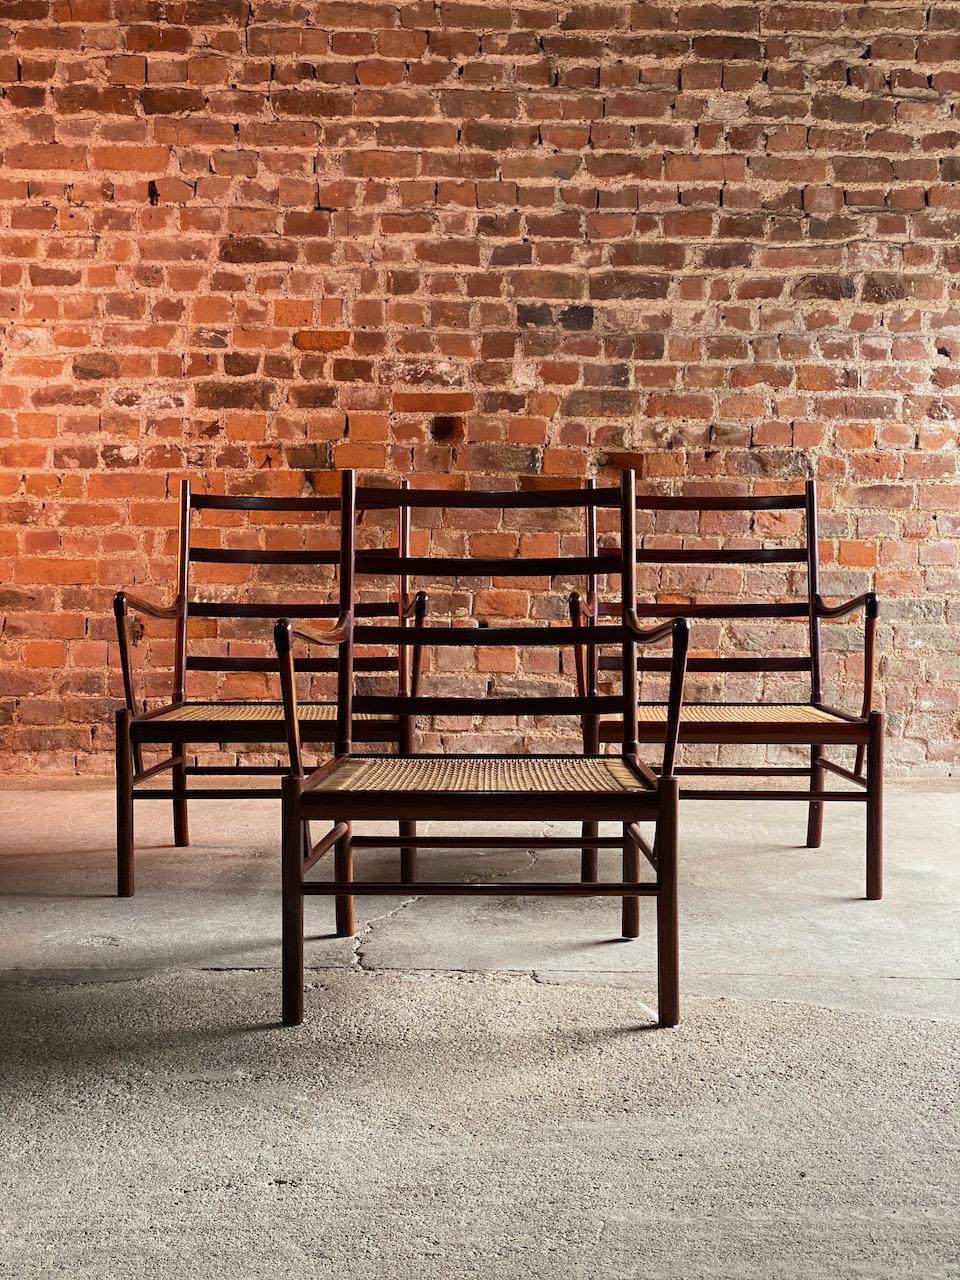 Ole Wanscher Model 149 rosewood Colonial chairs by Poul Jeppesens Denmark circa 1950

Magnificent set of three Ole Wanscher Model 149 'Colonial' chairs in Brazilian rosewood for cabinet maker Poul Jeppesens Møbelfabrik, Denmark circa 1950, these